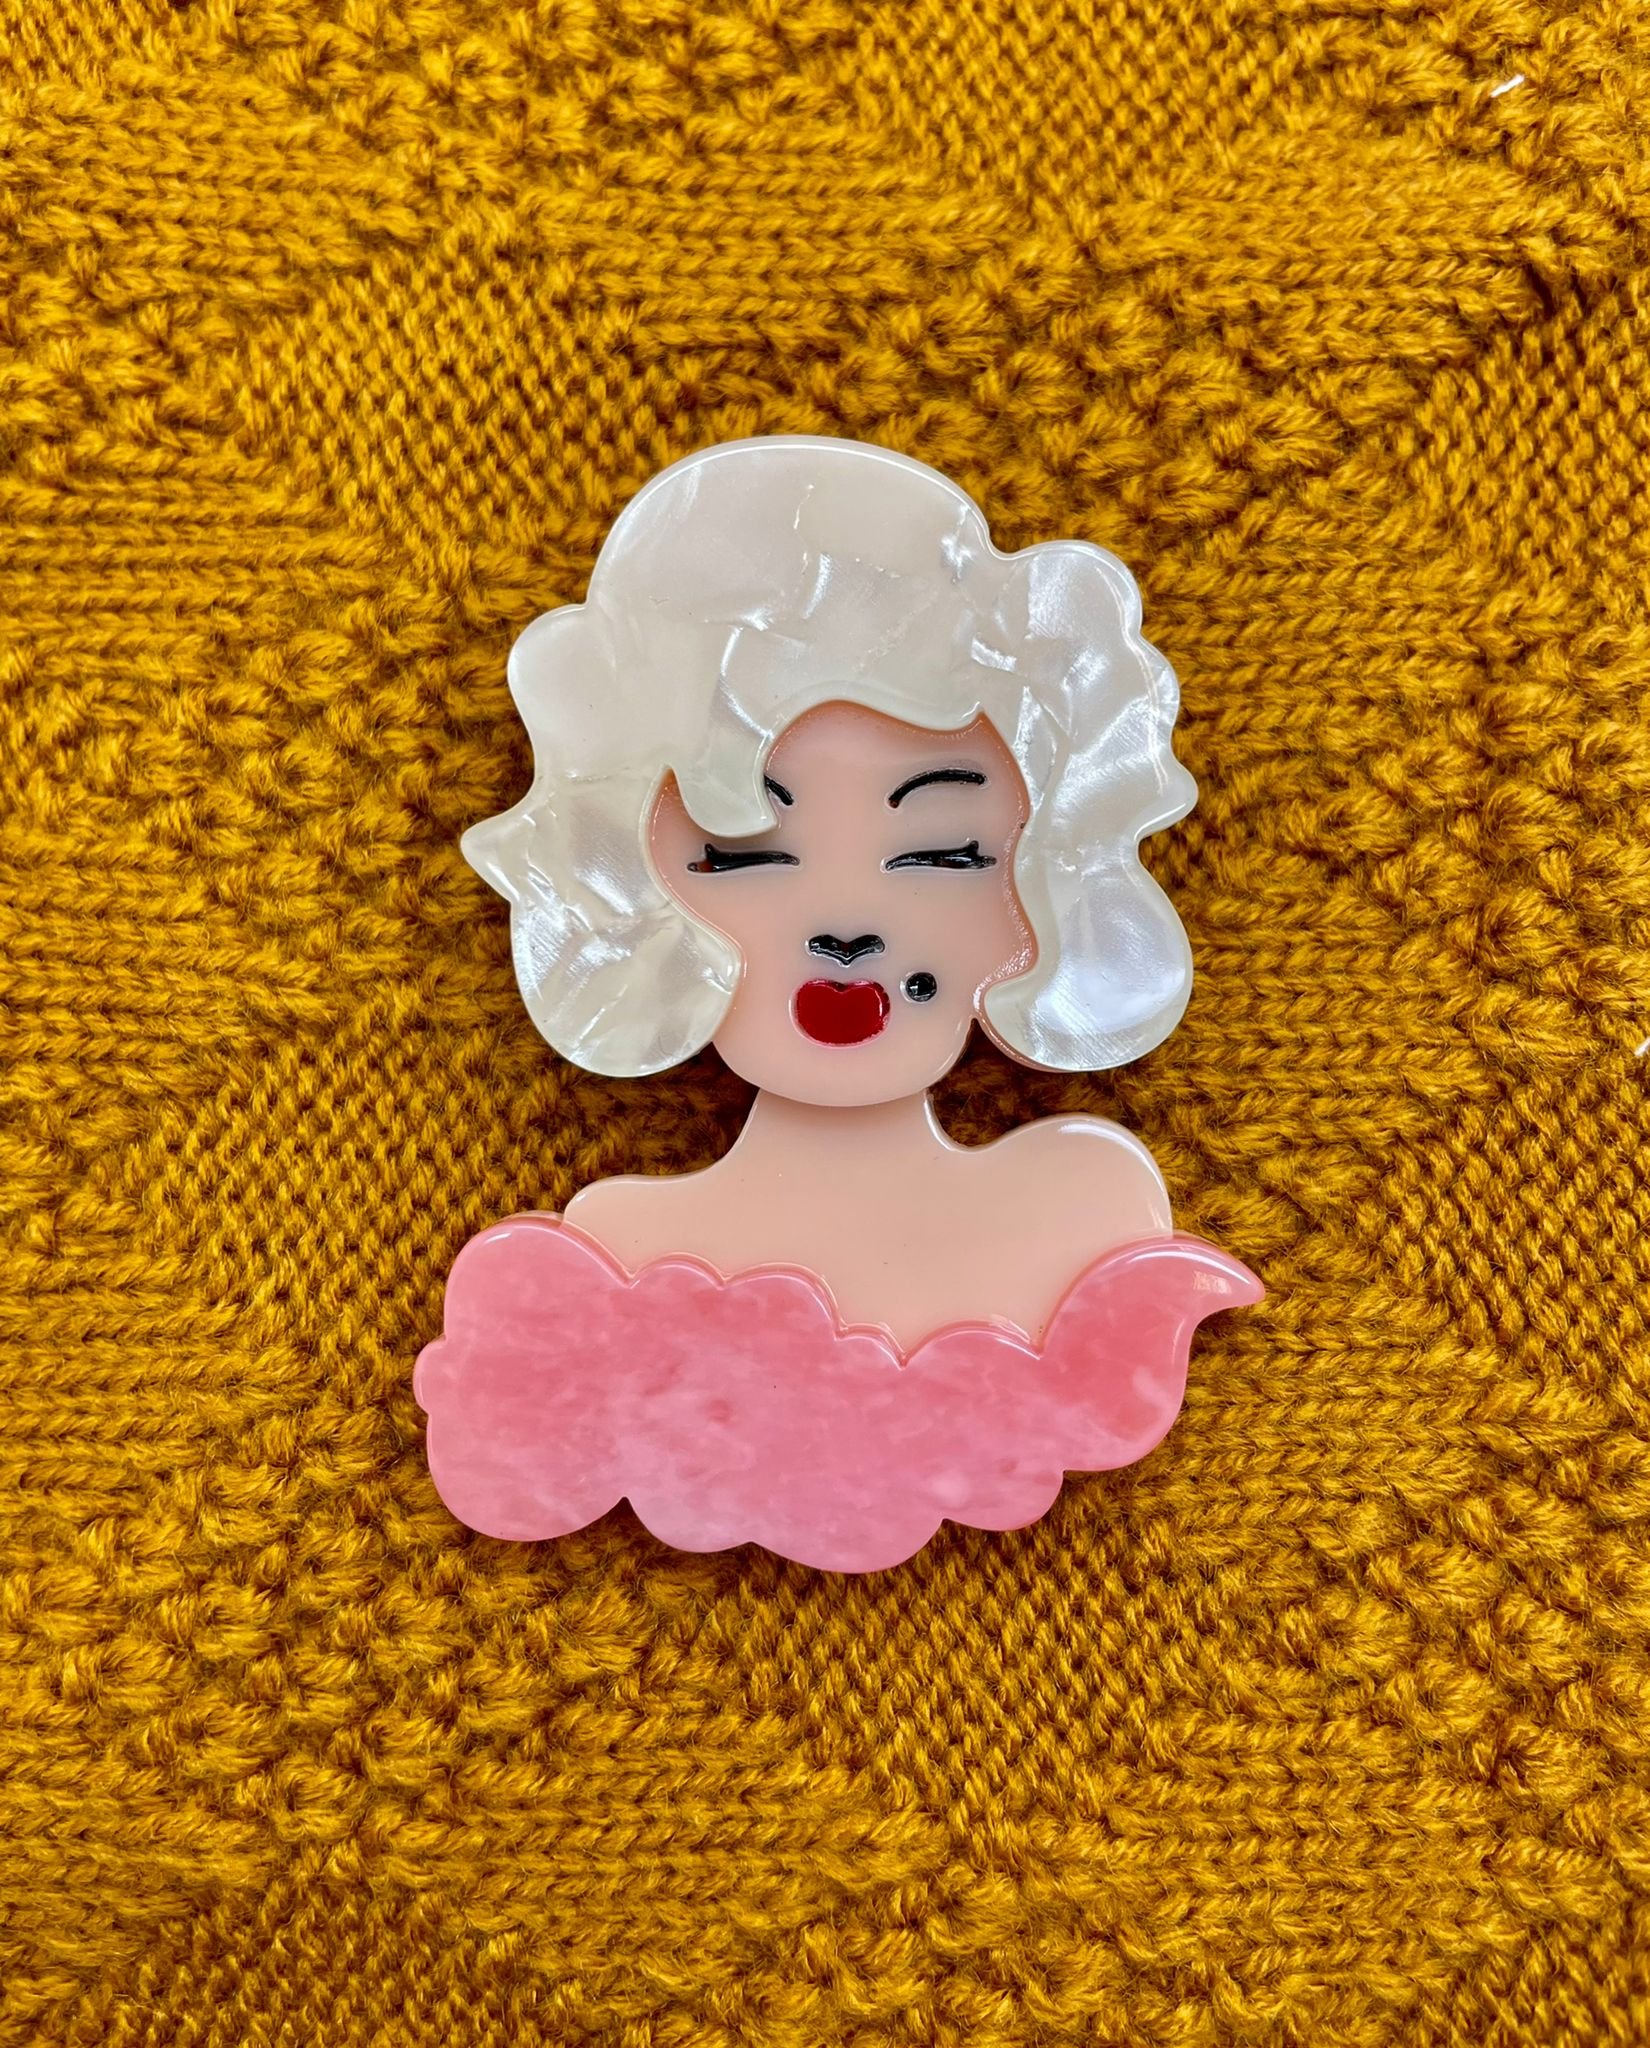 Kitsch Marilyn Monroe Styled Acrylic Pin Brooch, Fun Rockabilly Style & Oh So Kitsch, Blonde Bombshell - True and authentic vintage style clothing, inspired by the Classic styles of CC41 , WW2 and the fun 1950s RocknRoll era, for everyday wear plus events like Goodwood Revival, Twinwood Festival and Viva Las Vegas Rockabilly Weekend Rock n Romance Rock n Romance